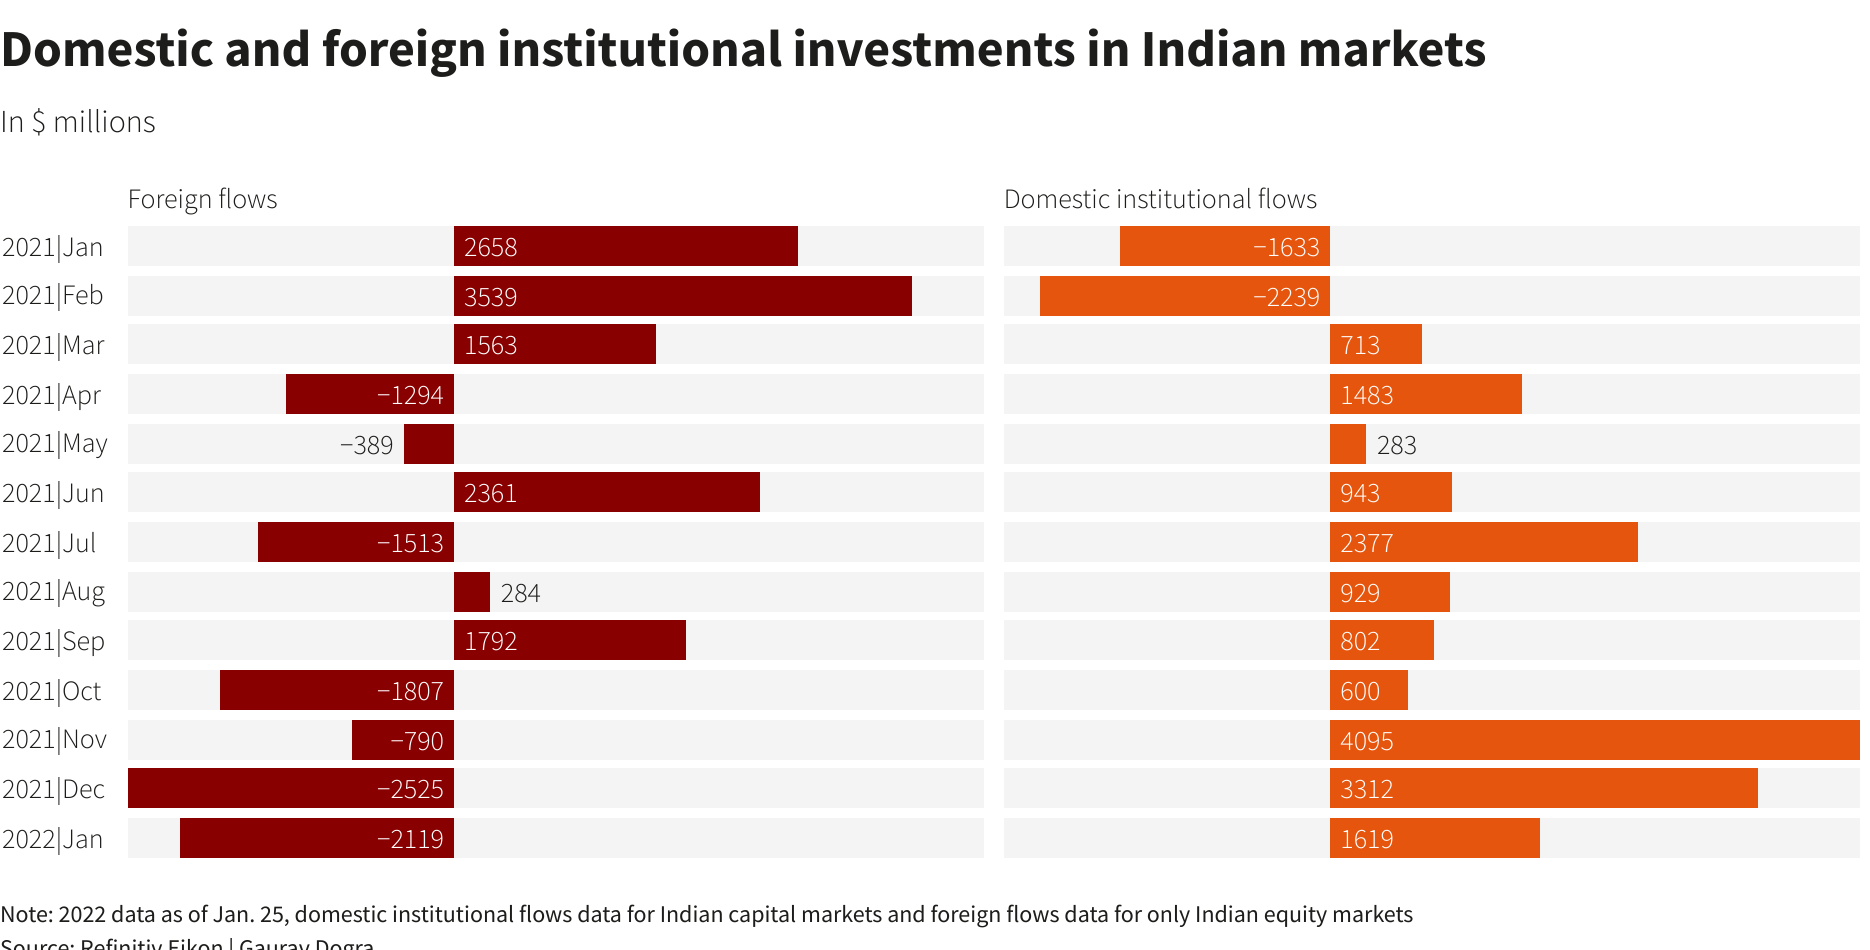 Domestic and foreign institutional investments in Indian markets